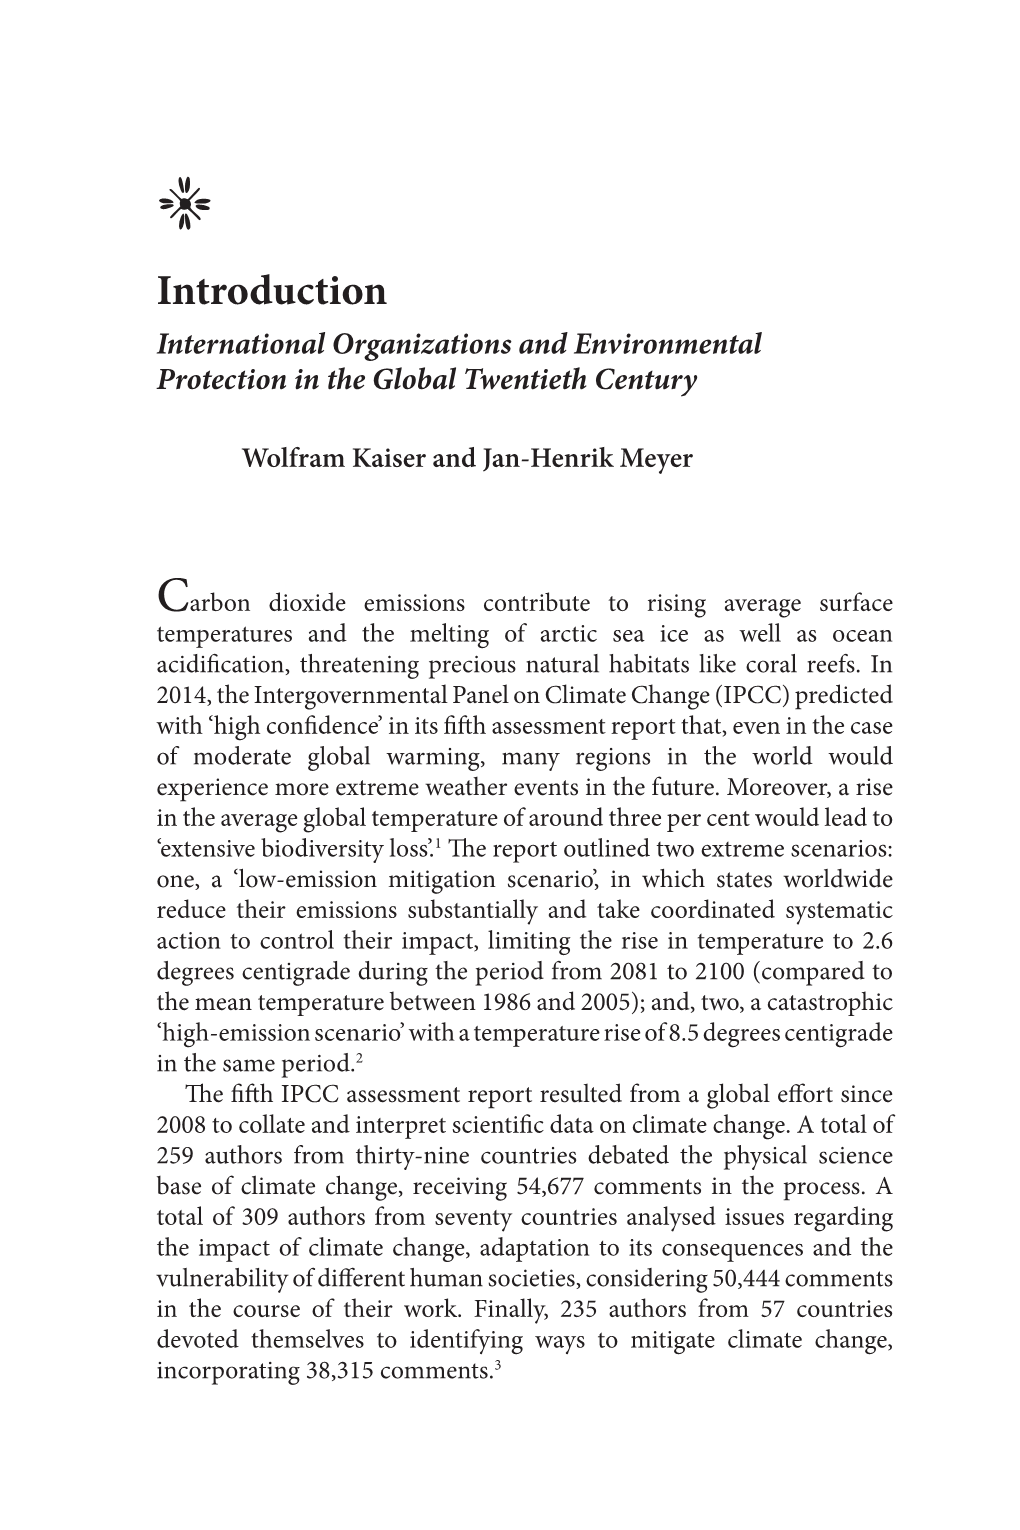 Introduction International Organizations and Environmental Protection in the Global Twentieth Century